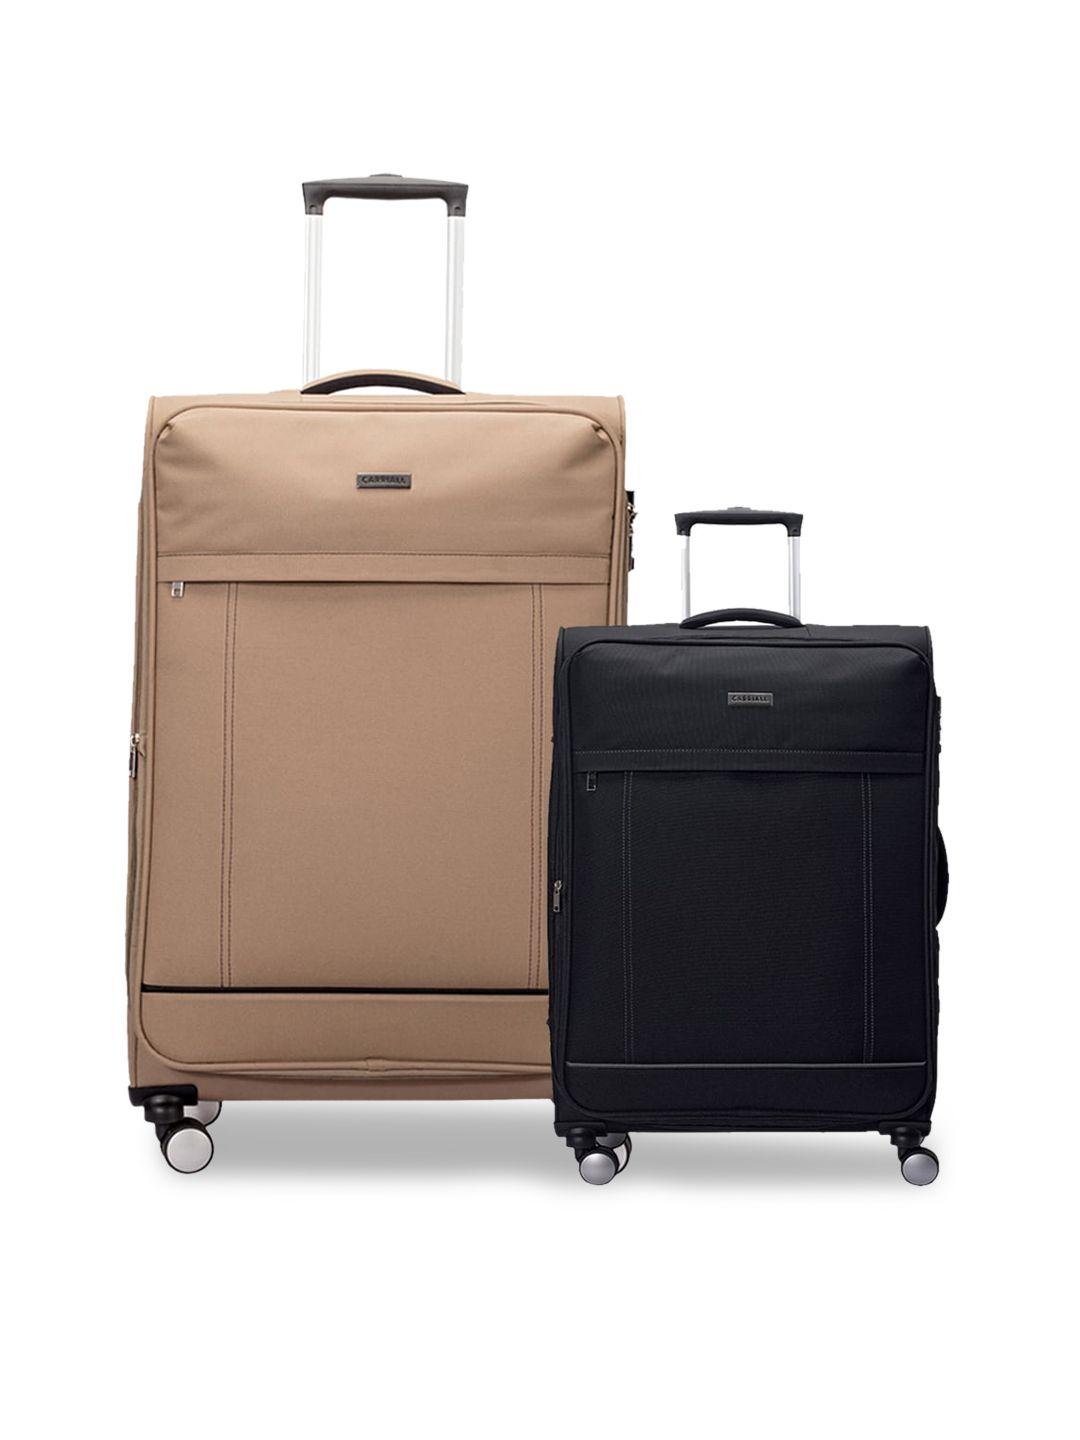 carriall set of 2 beige and black large & small luggage